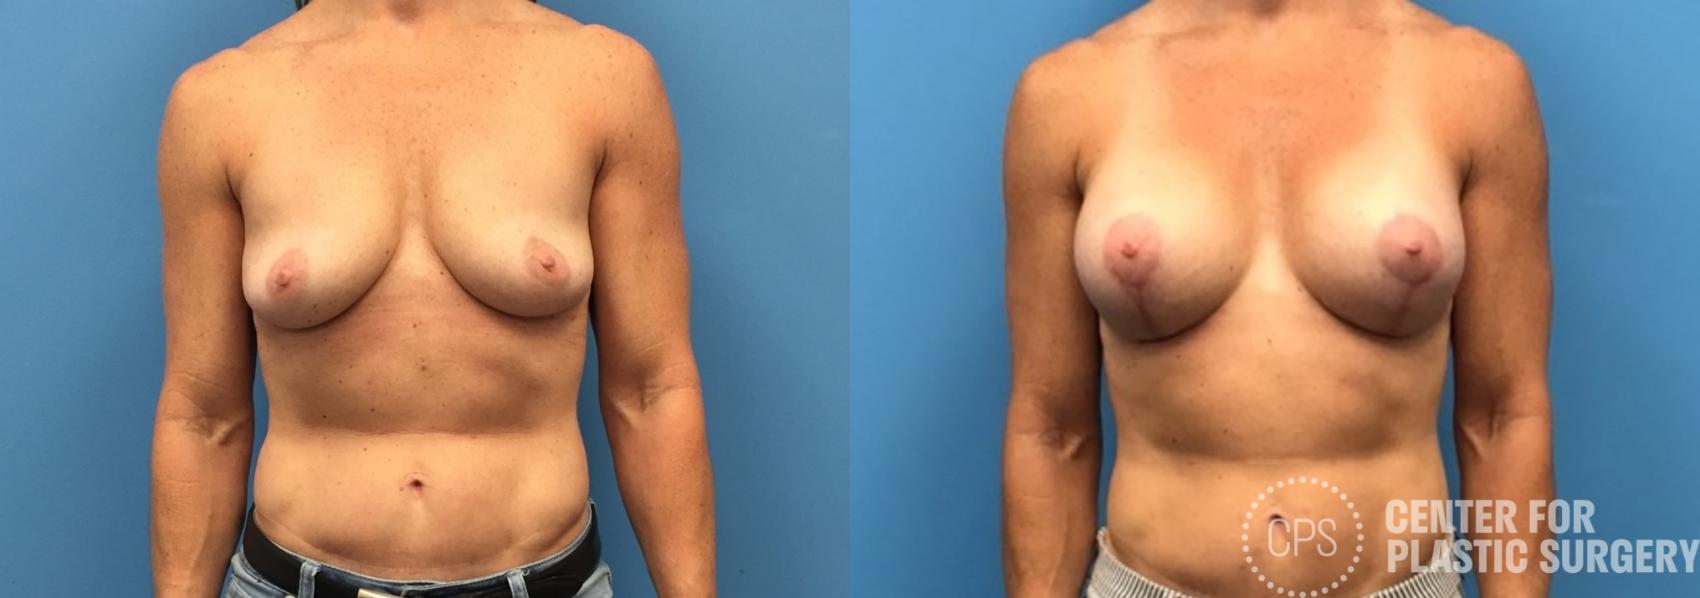 Breast Augmentation with Lift Case 230 Before & After Front | Chevy Chase & Annandale, Washington D.C. Metropolitan Area | Center for Plastic Surgery